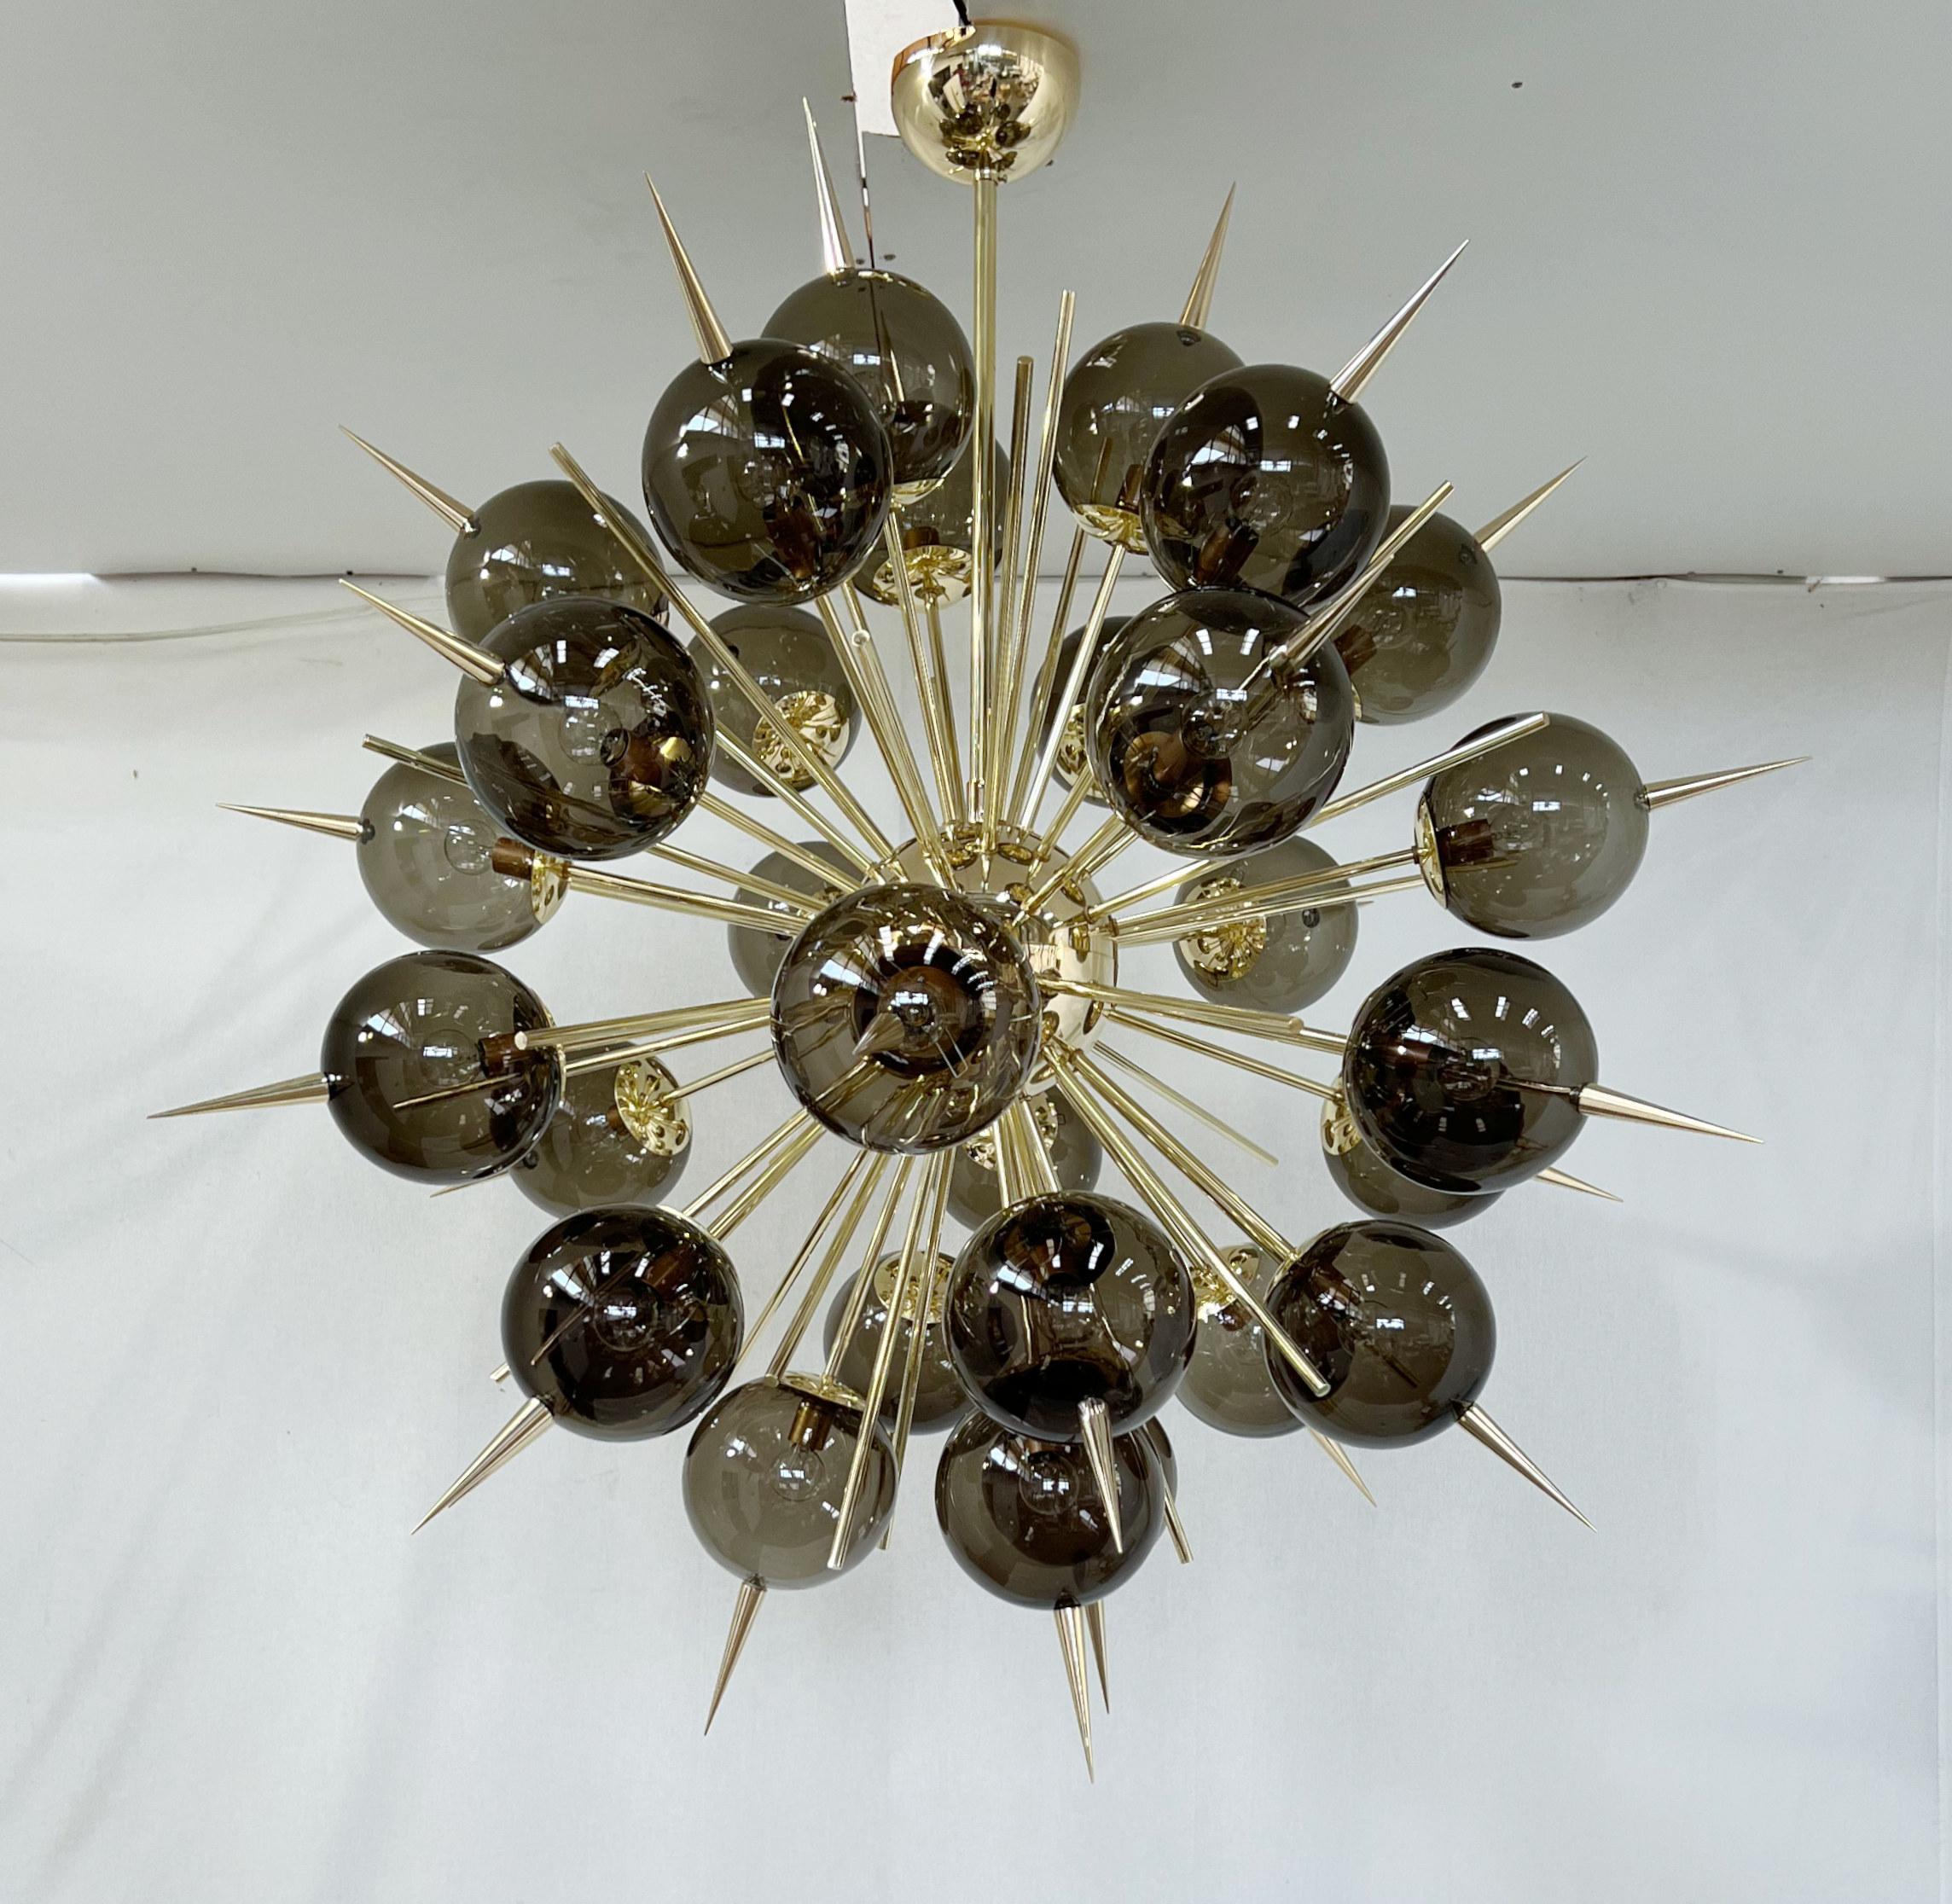 Italian Sputnik chandelier with 30 Murano glass globes and solid brass spikes mounted on brass frame / Designed by Fabio Bergomi for Fabio Ltd / Made in Italy
30 lights / E12 or E14 type / max 40W each
Measures: Diameter 47 inches / Height 54 inches